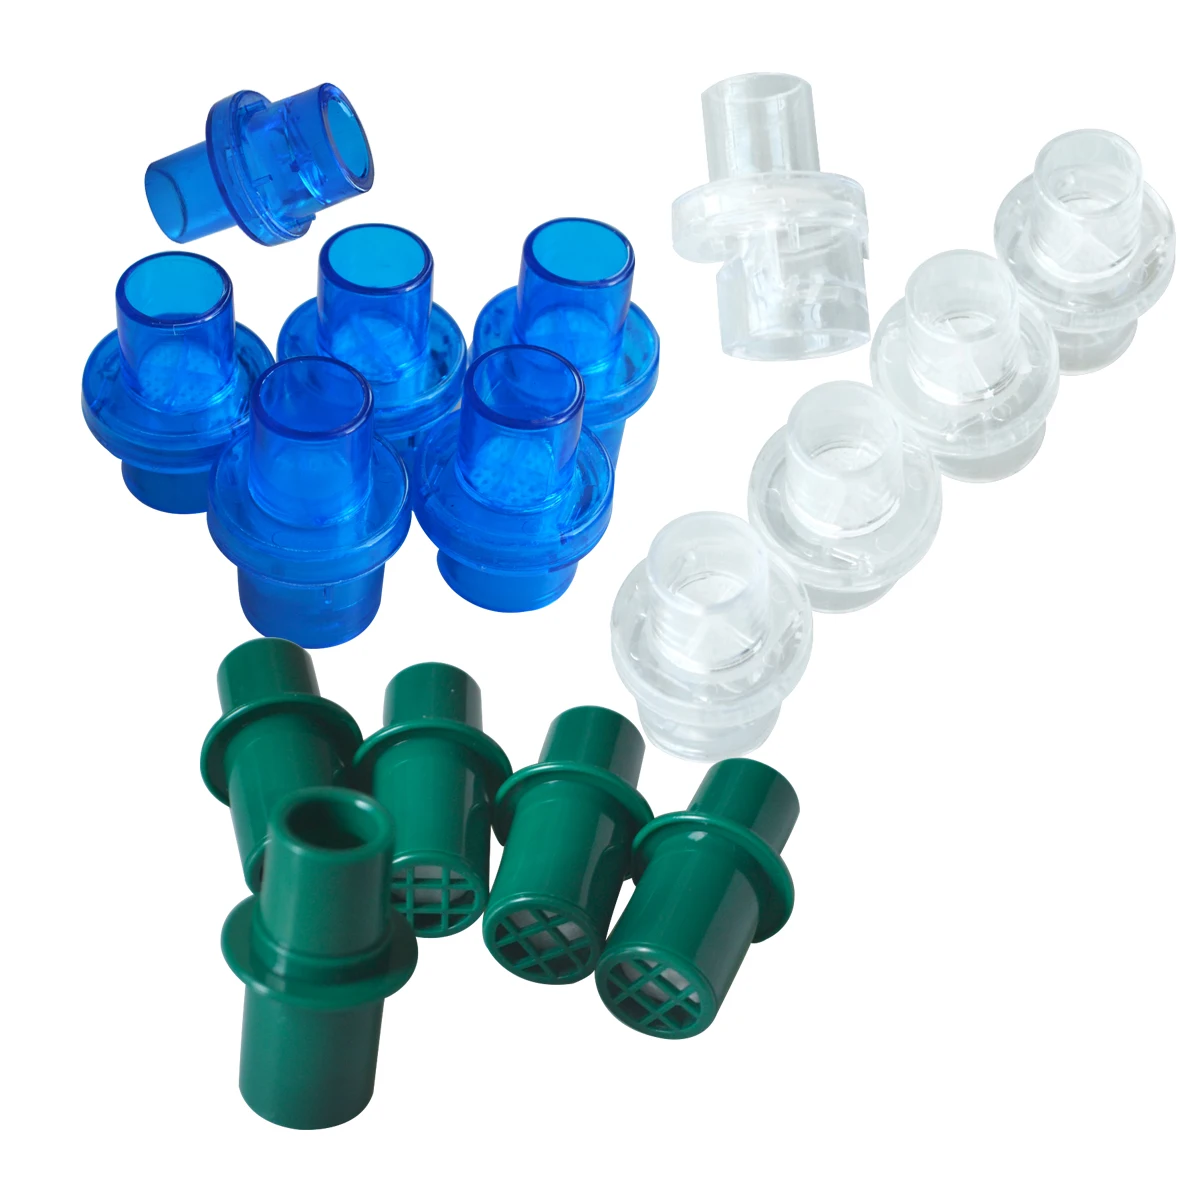 

5 pcs Disposable Filter Valve For Big CPR Training Mask One-Way Valve First Aid Rescue Practice Diameter 22mm/17mm